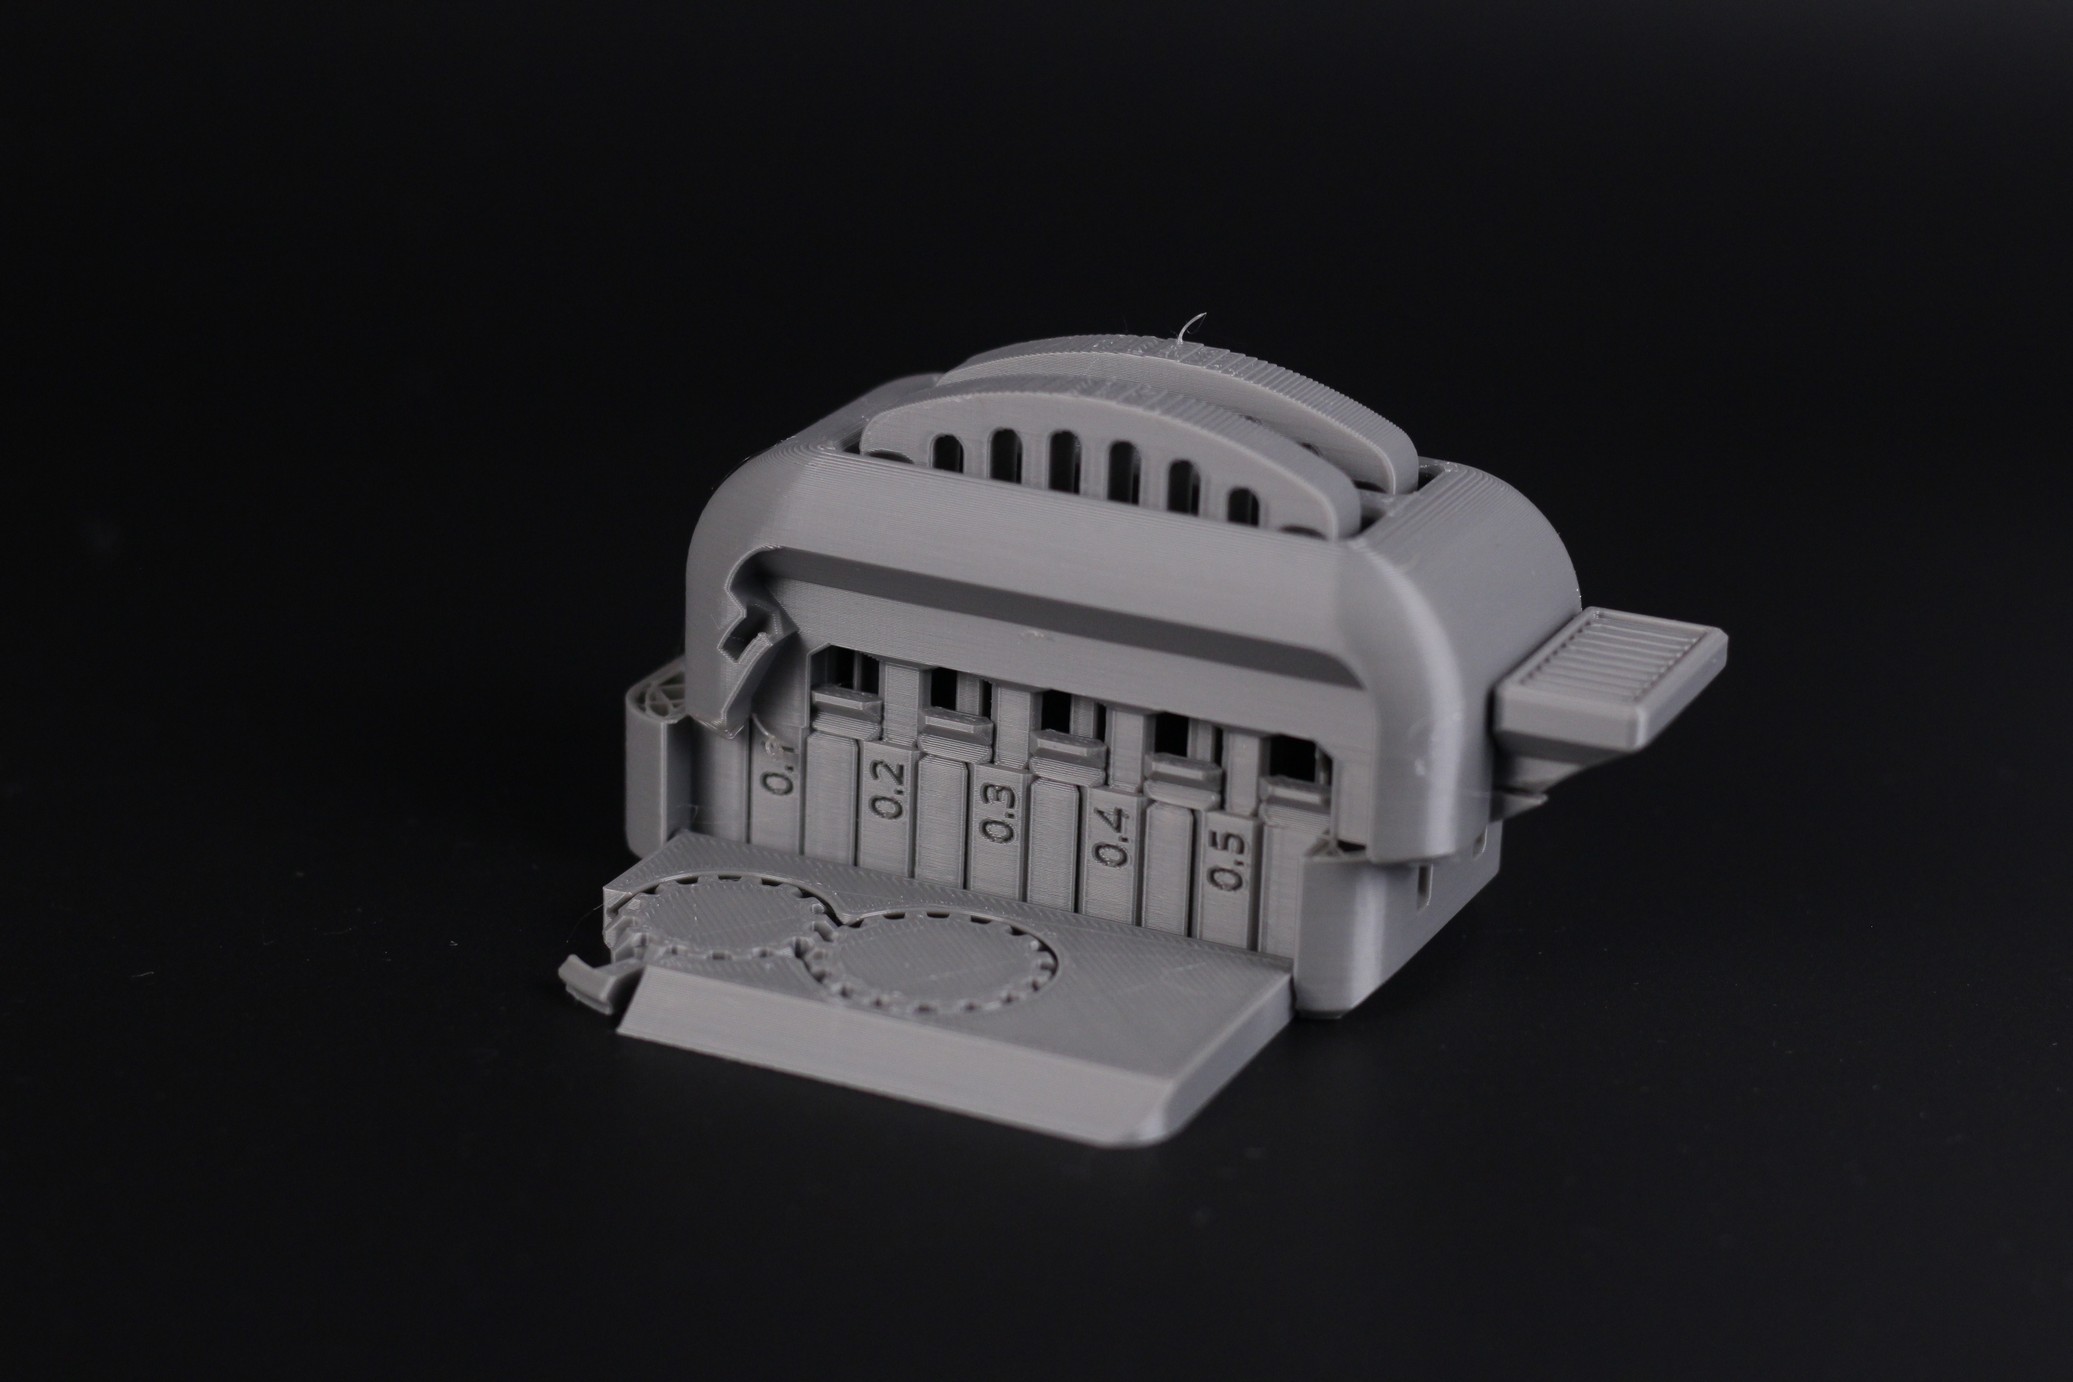 Torture Toaster printed on Anycubic Kobra 5 | Anycubic Kobra Review: The New Budget Standard